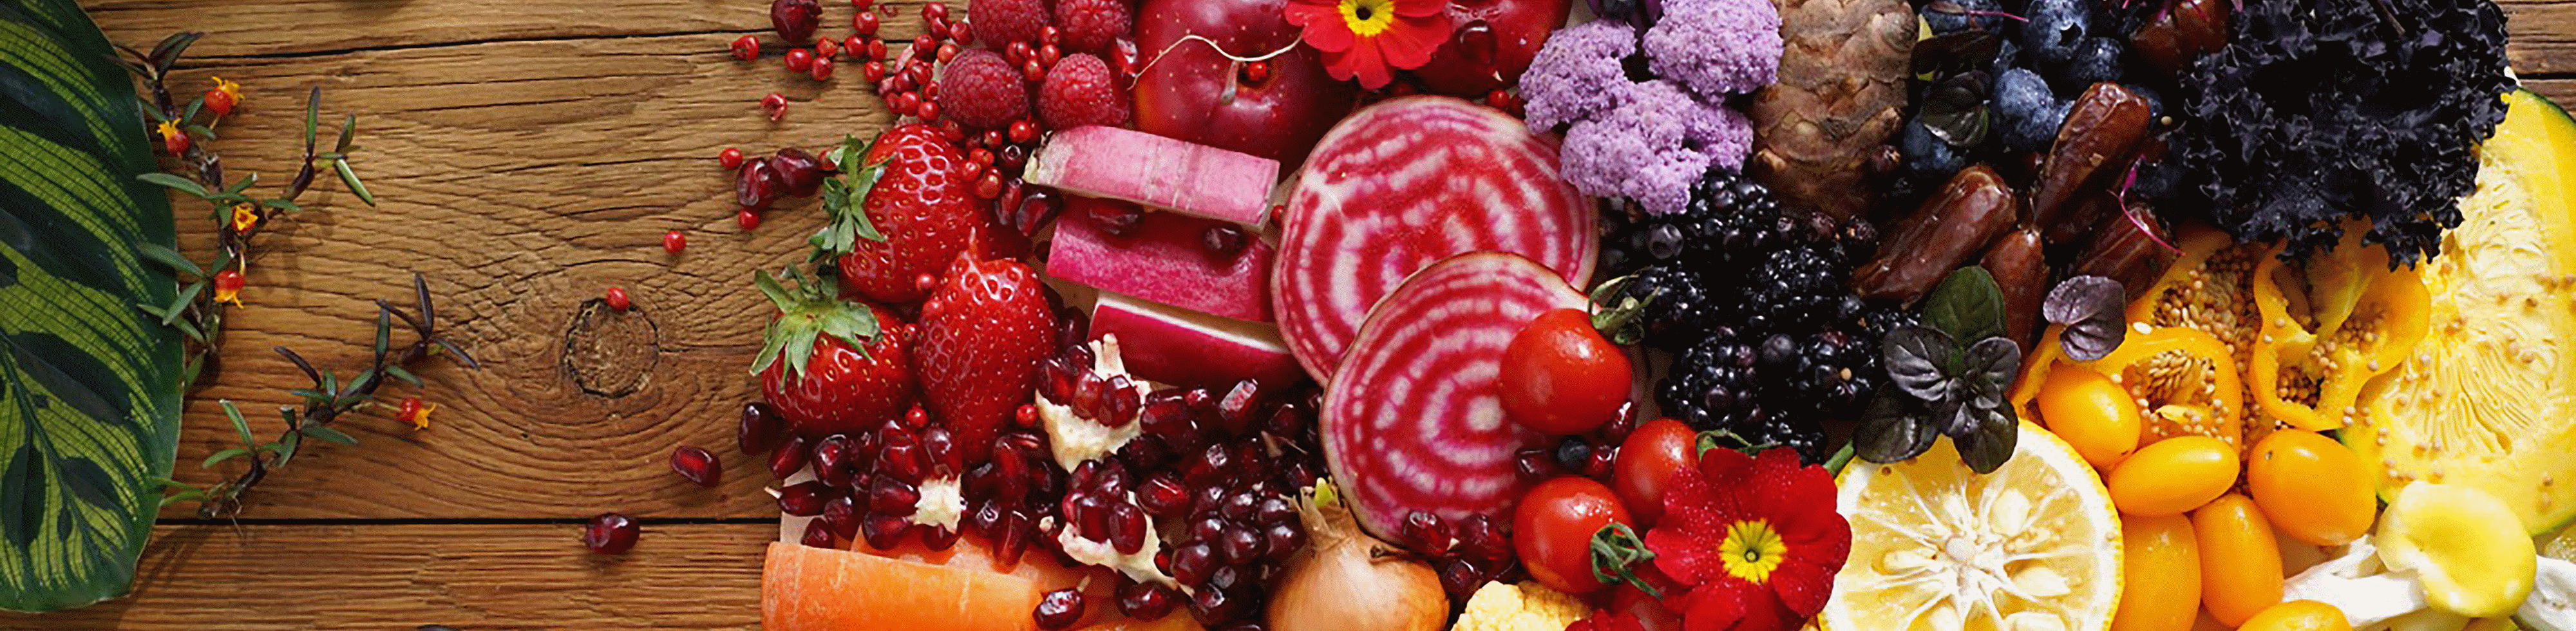 Image of colorful vegetables and fruits taken with this lens at high resolution in every corner